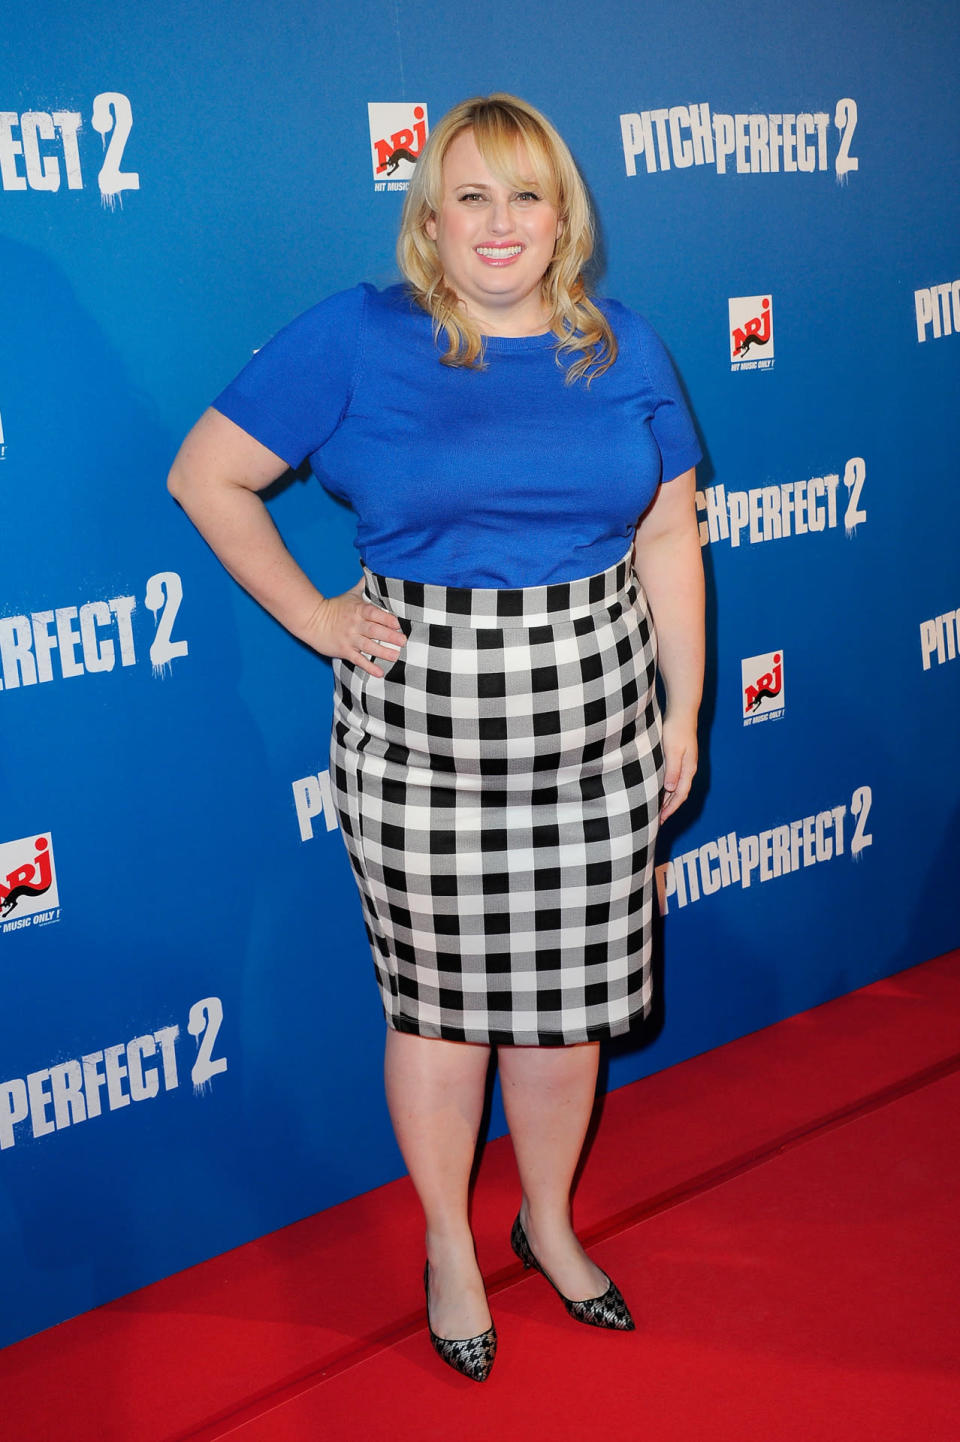 Wilson mixed it up with a black and white checkered pencil skirt, which she tempered with a royal blue T-shirt.